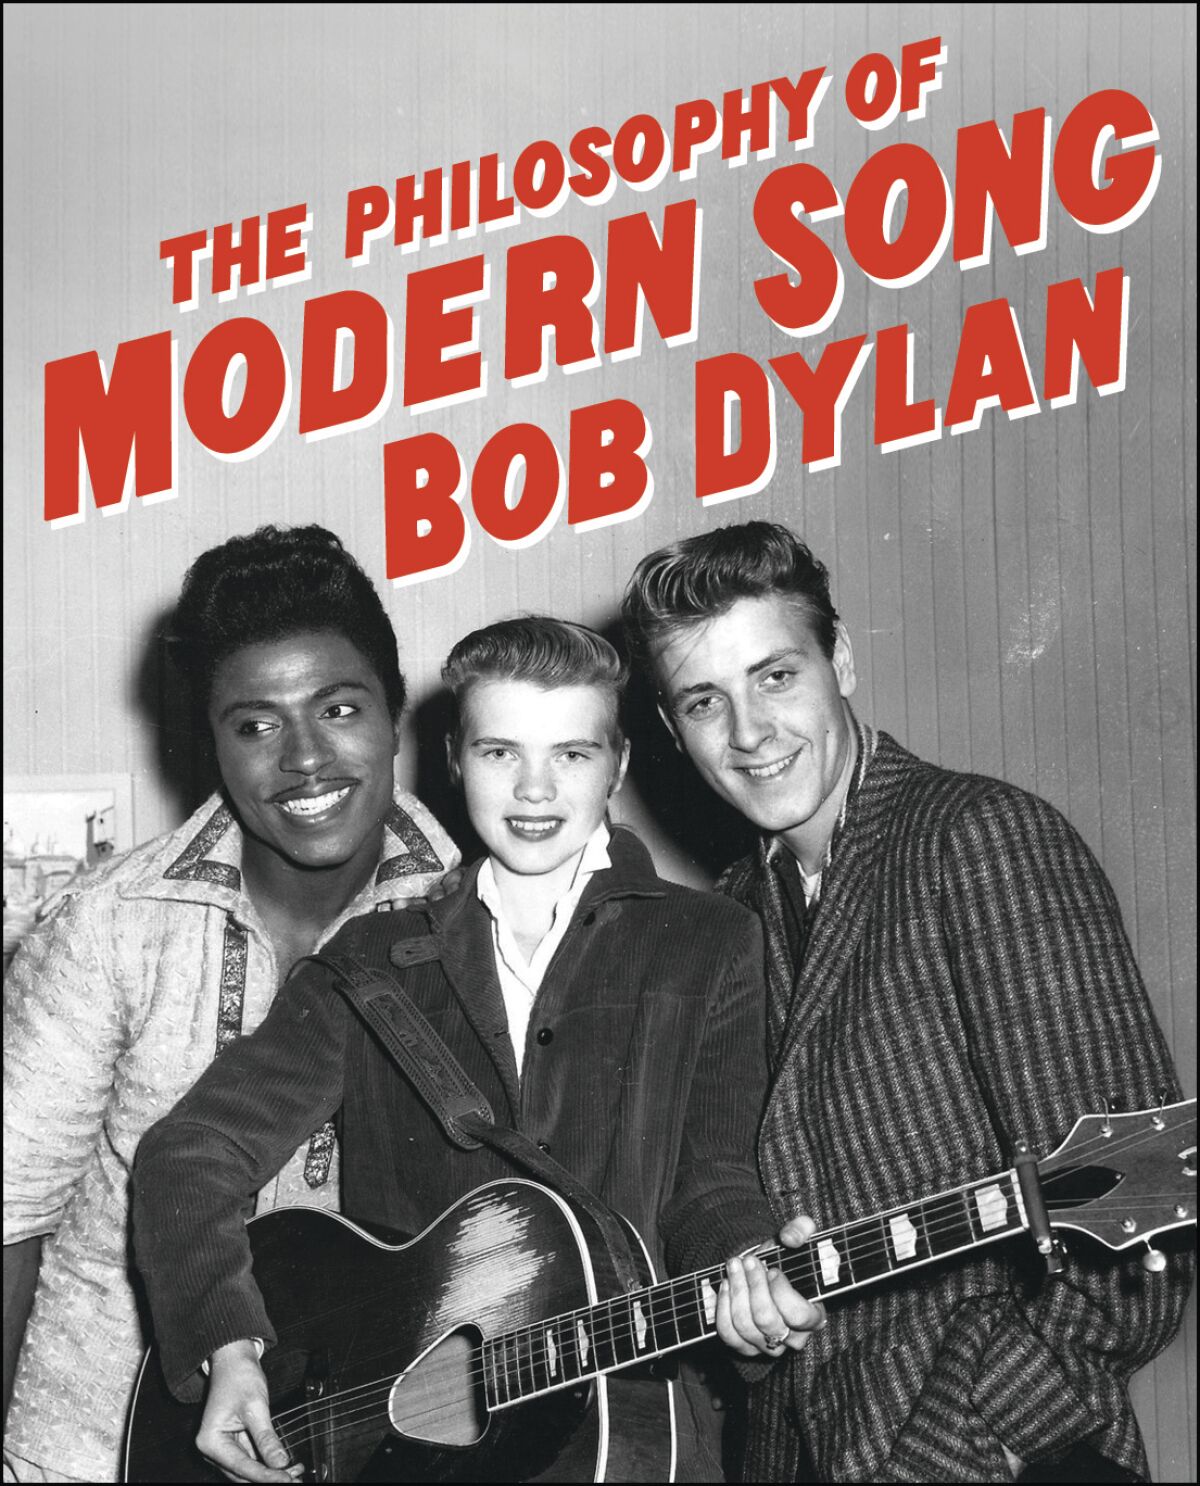 "The Philosophy of Modern Song Bob Dylan" book cover